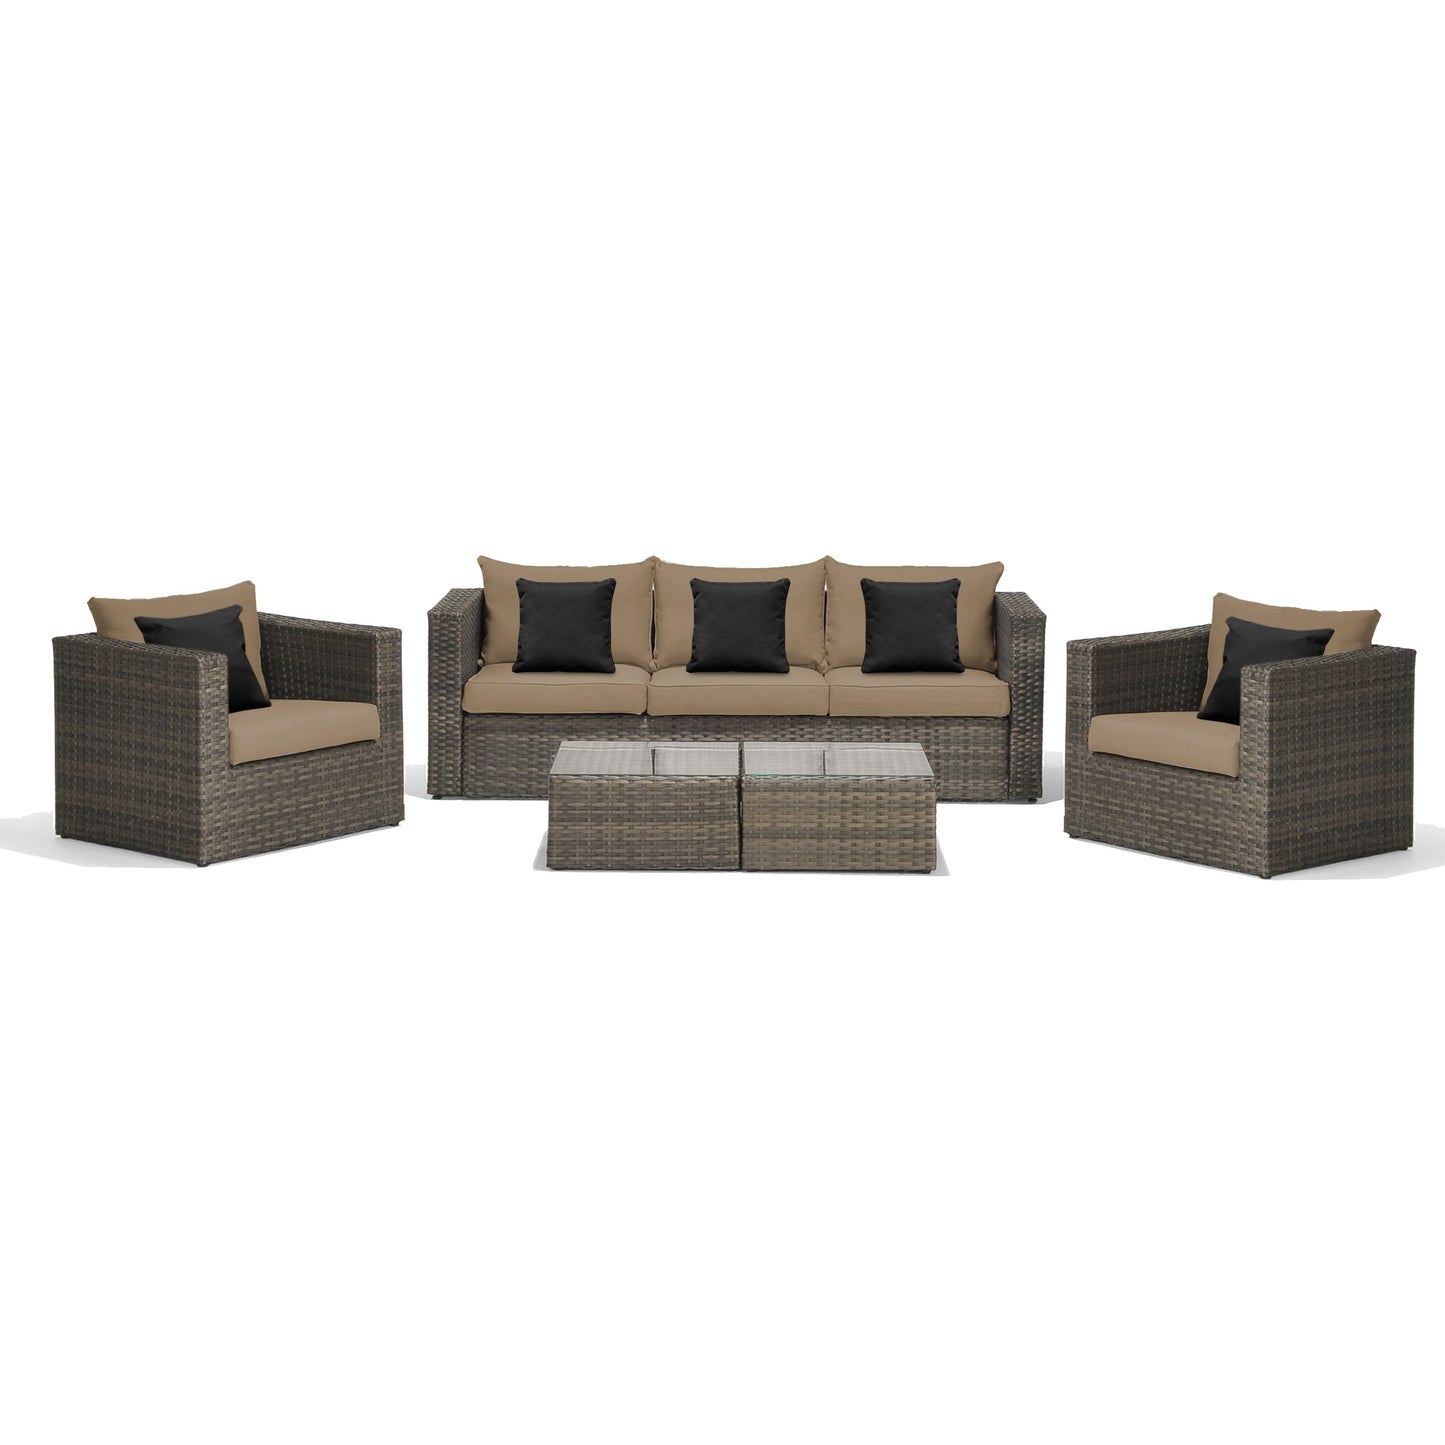 Mustang 5 Pieces Aluminum and Wicker Seating Set